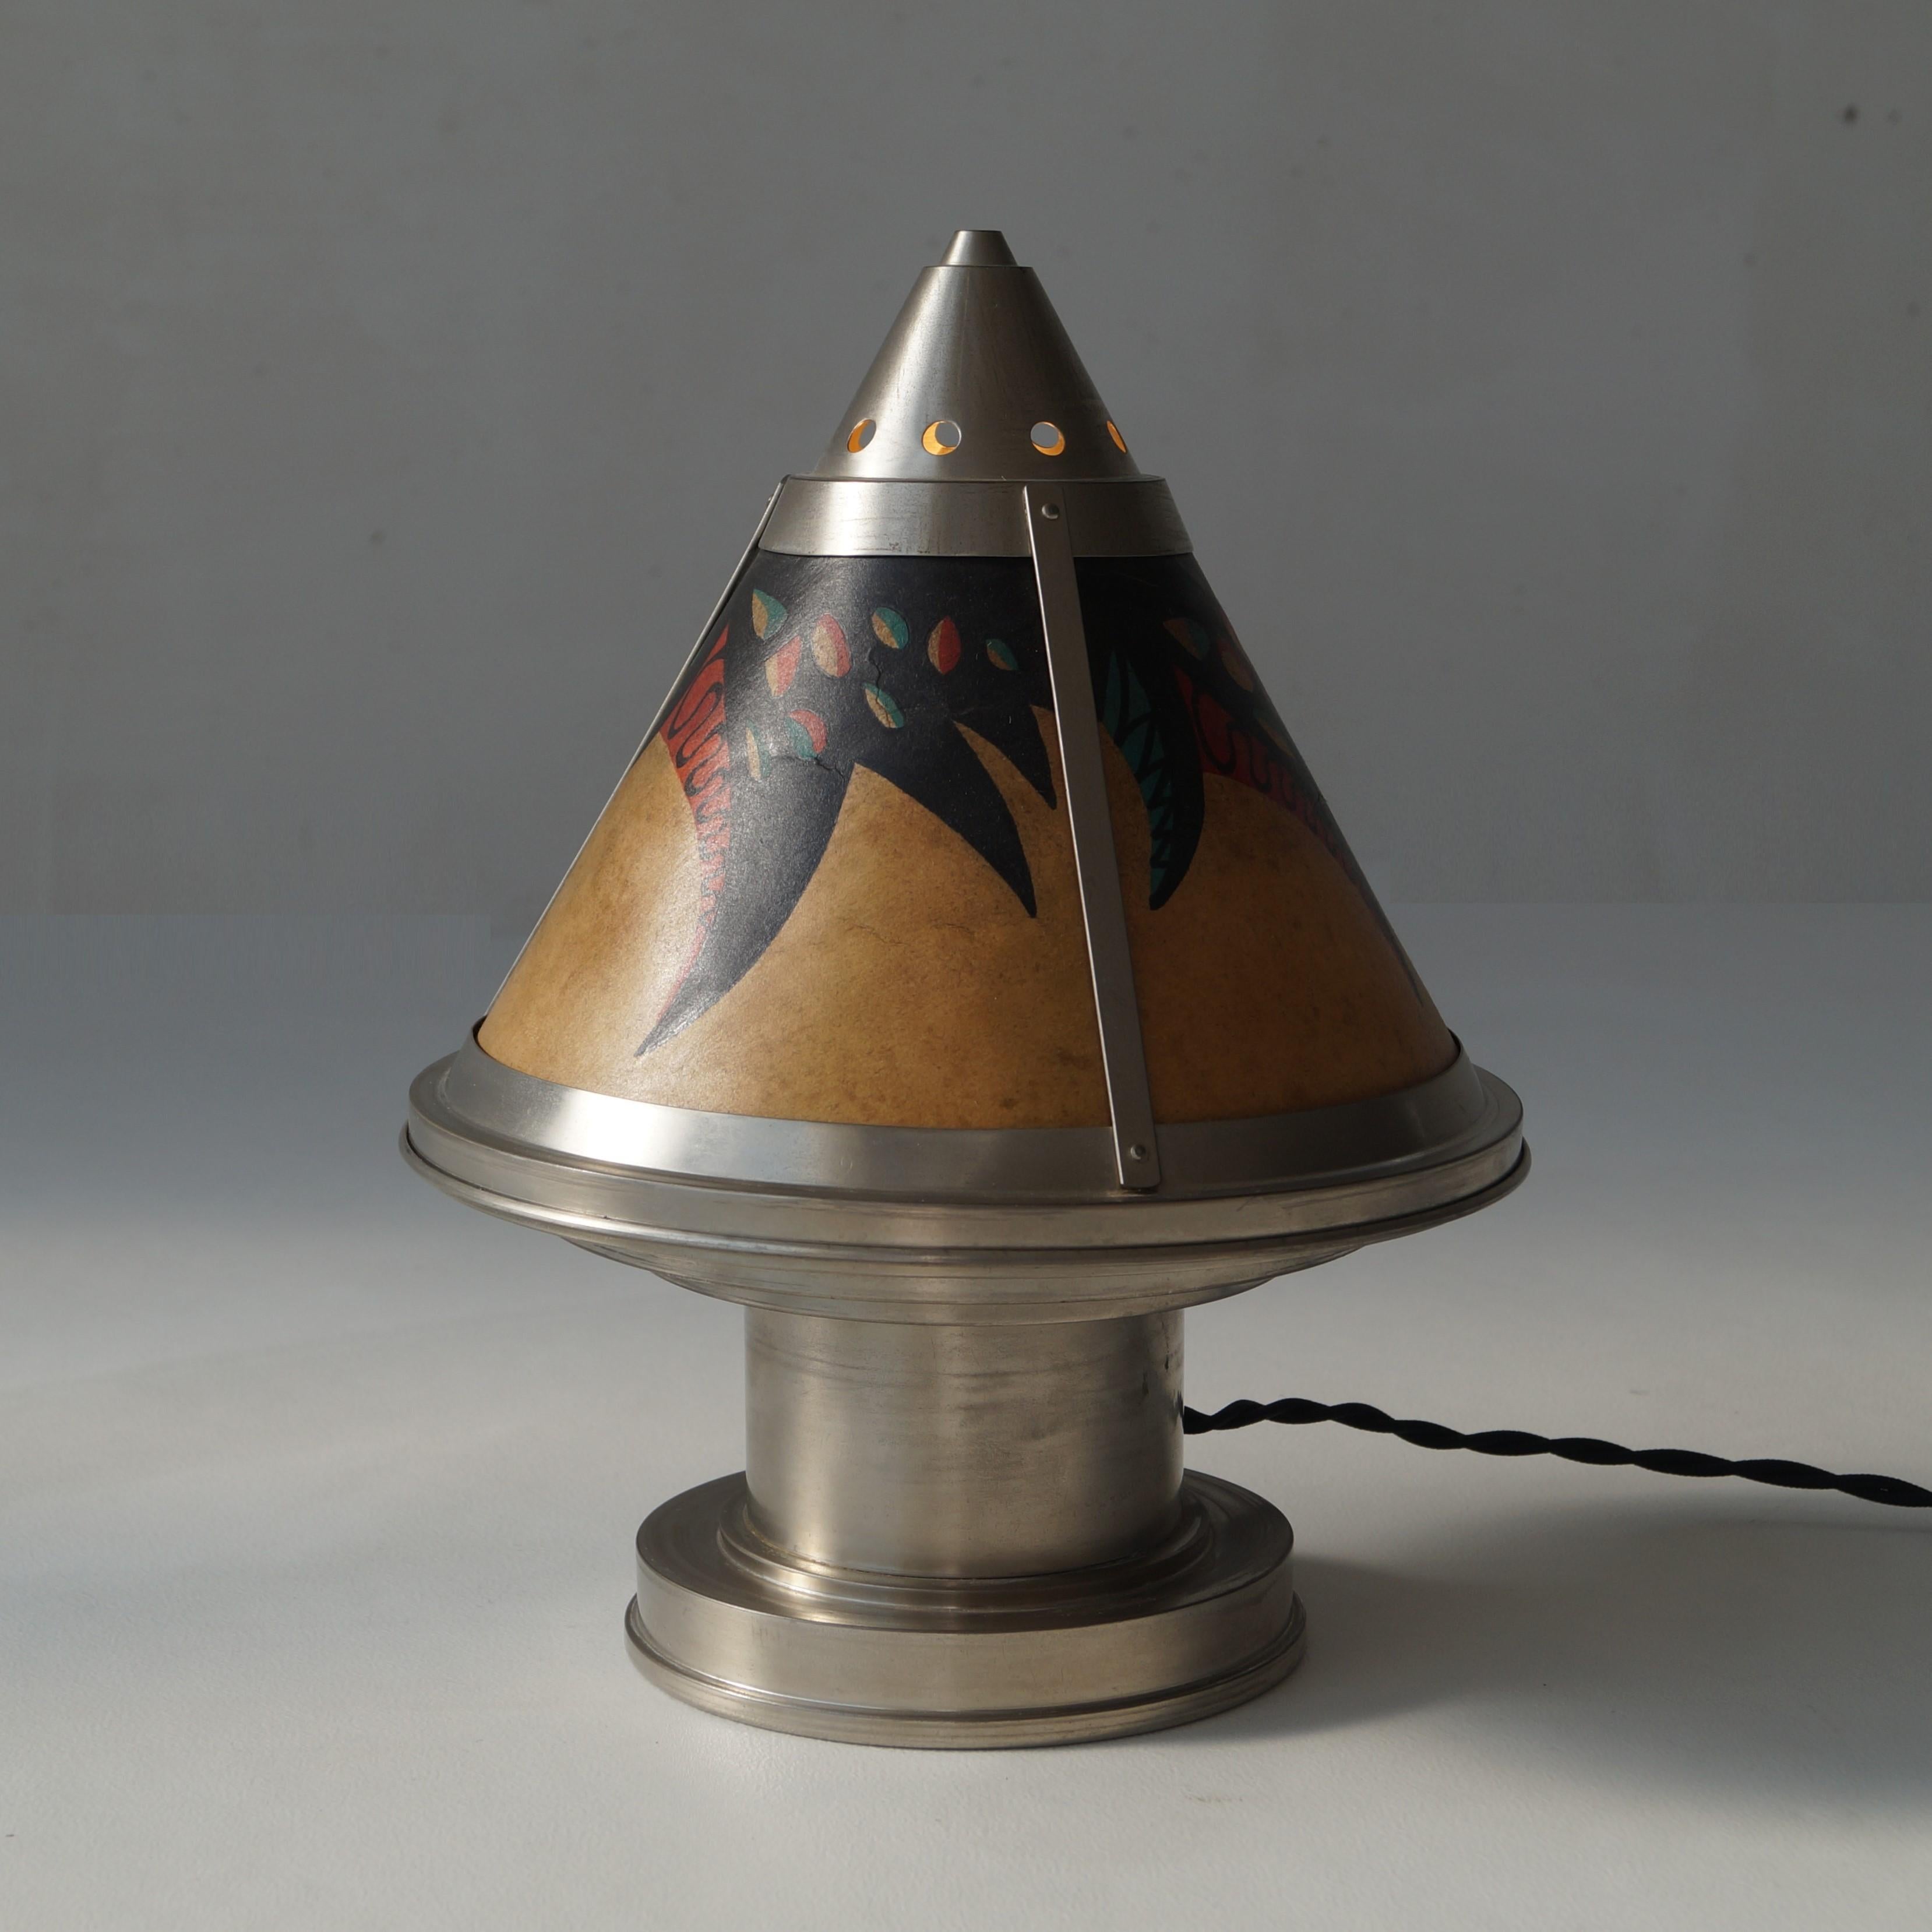 A rare Dutch Art Deco table lamp or bedside light by Dutch manufacturer Daalderop, c. 1925. The piece is in excellent condition regarding its age. These lamps were produced in brass and nickel plate. This one is the nickel version.

The lampshade is